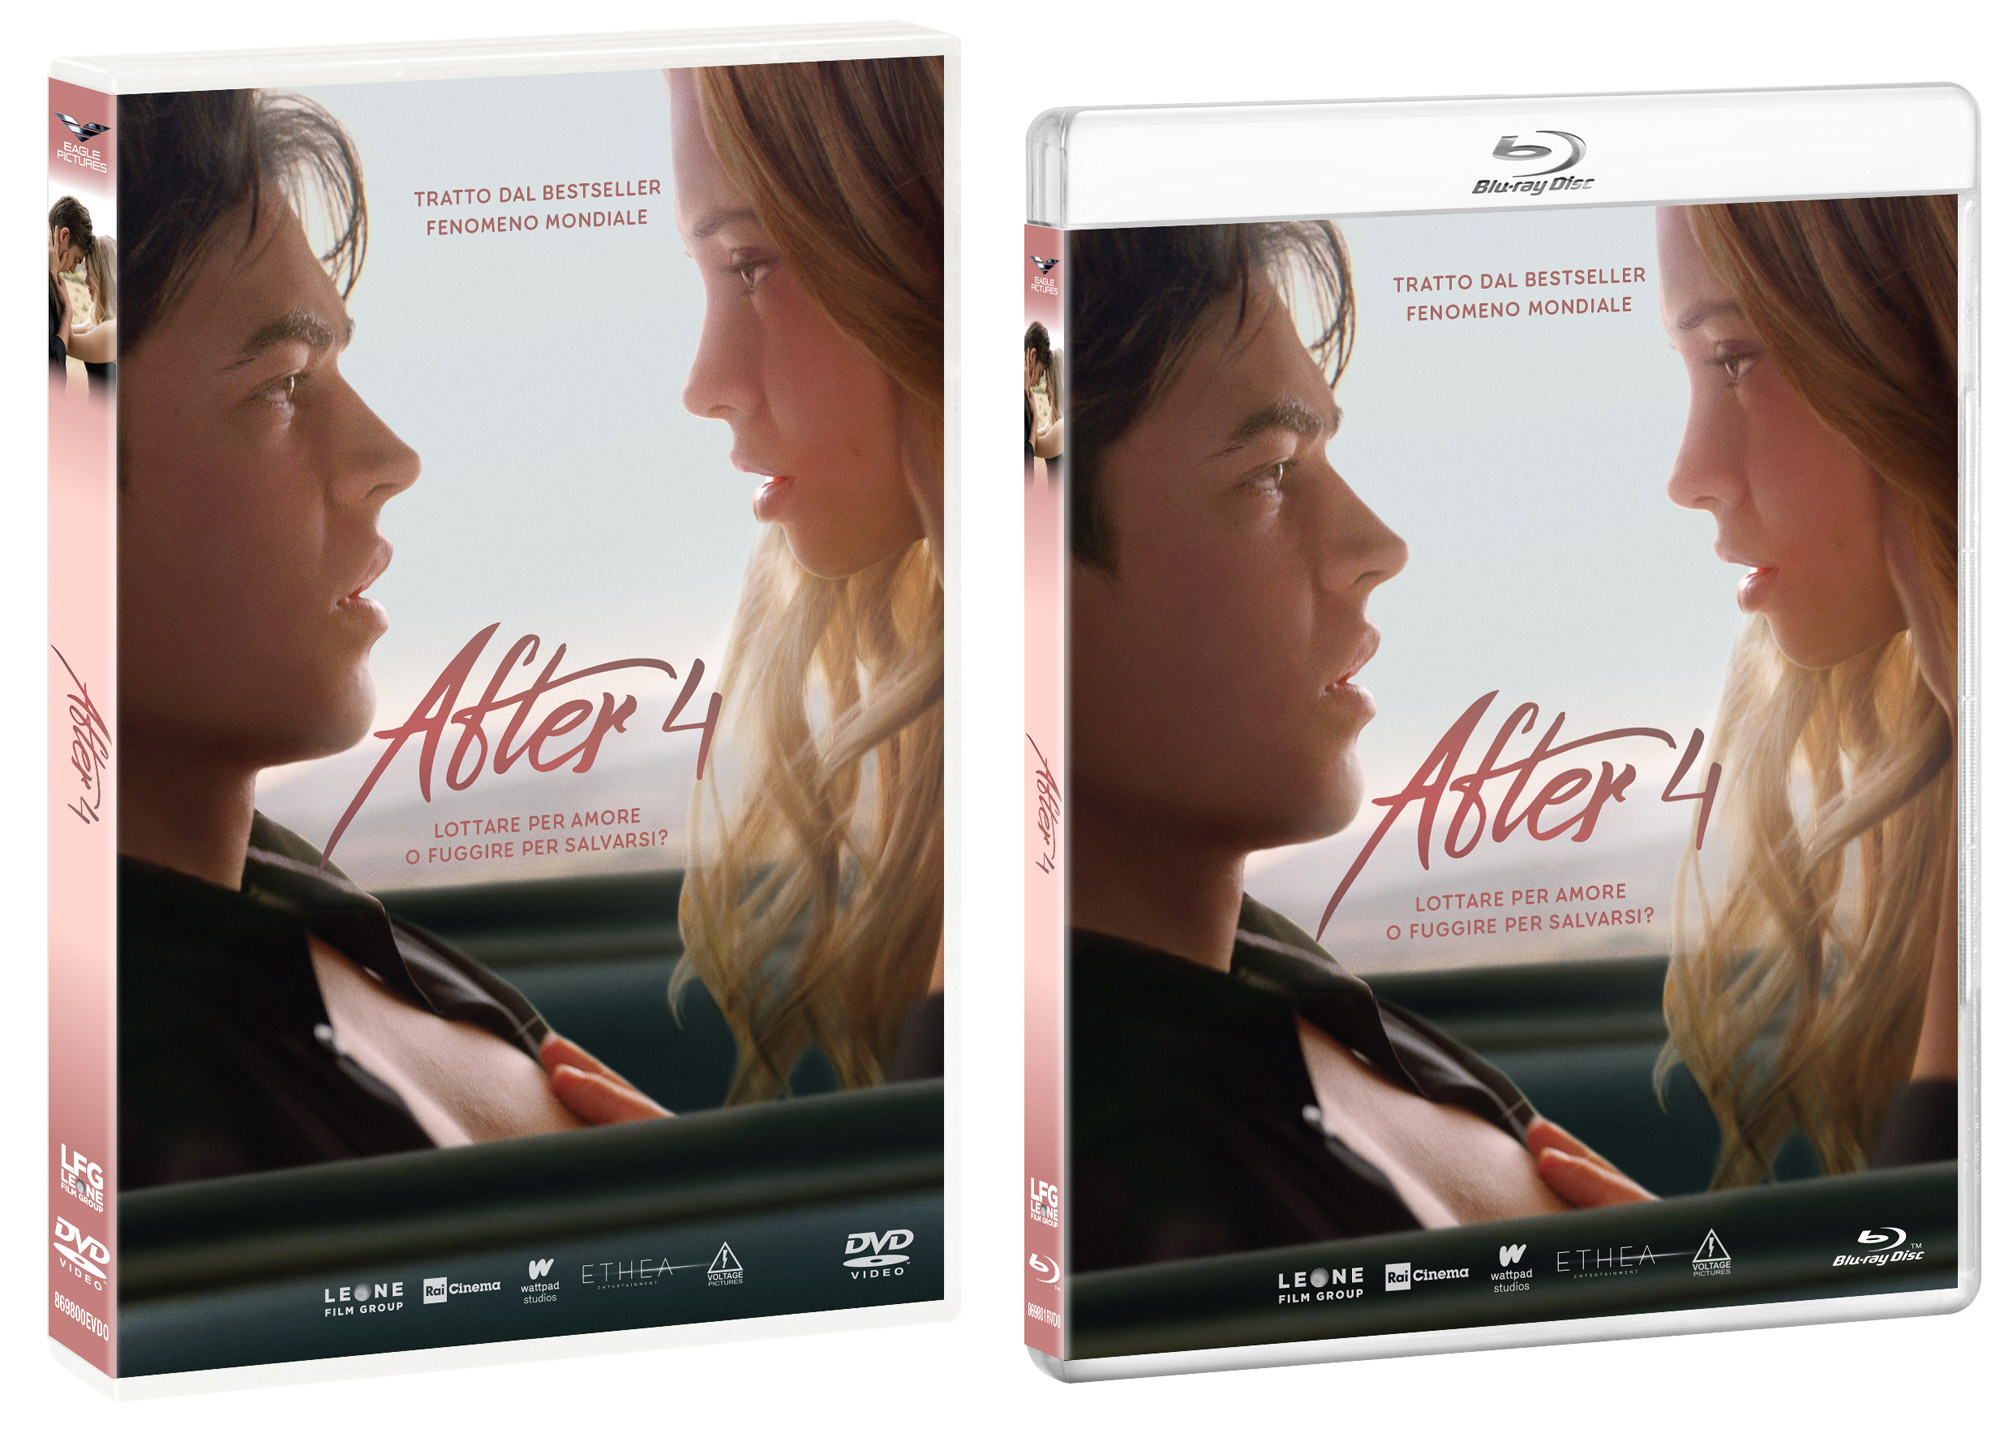 After 4 in DVD e Blu-Ray